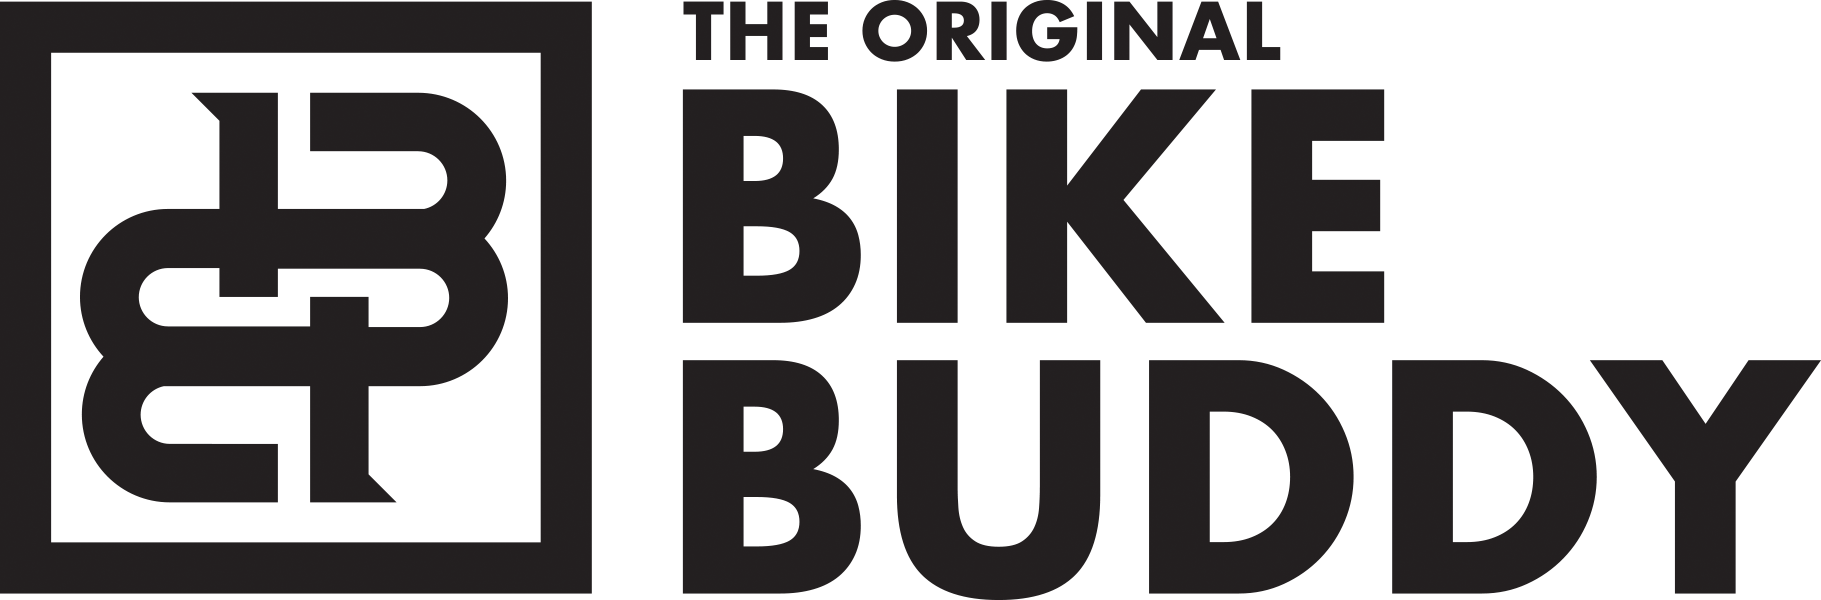 The Original Bike Buddy  Installed Kickstand Plate for Motorcycles